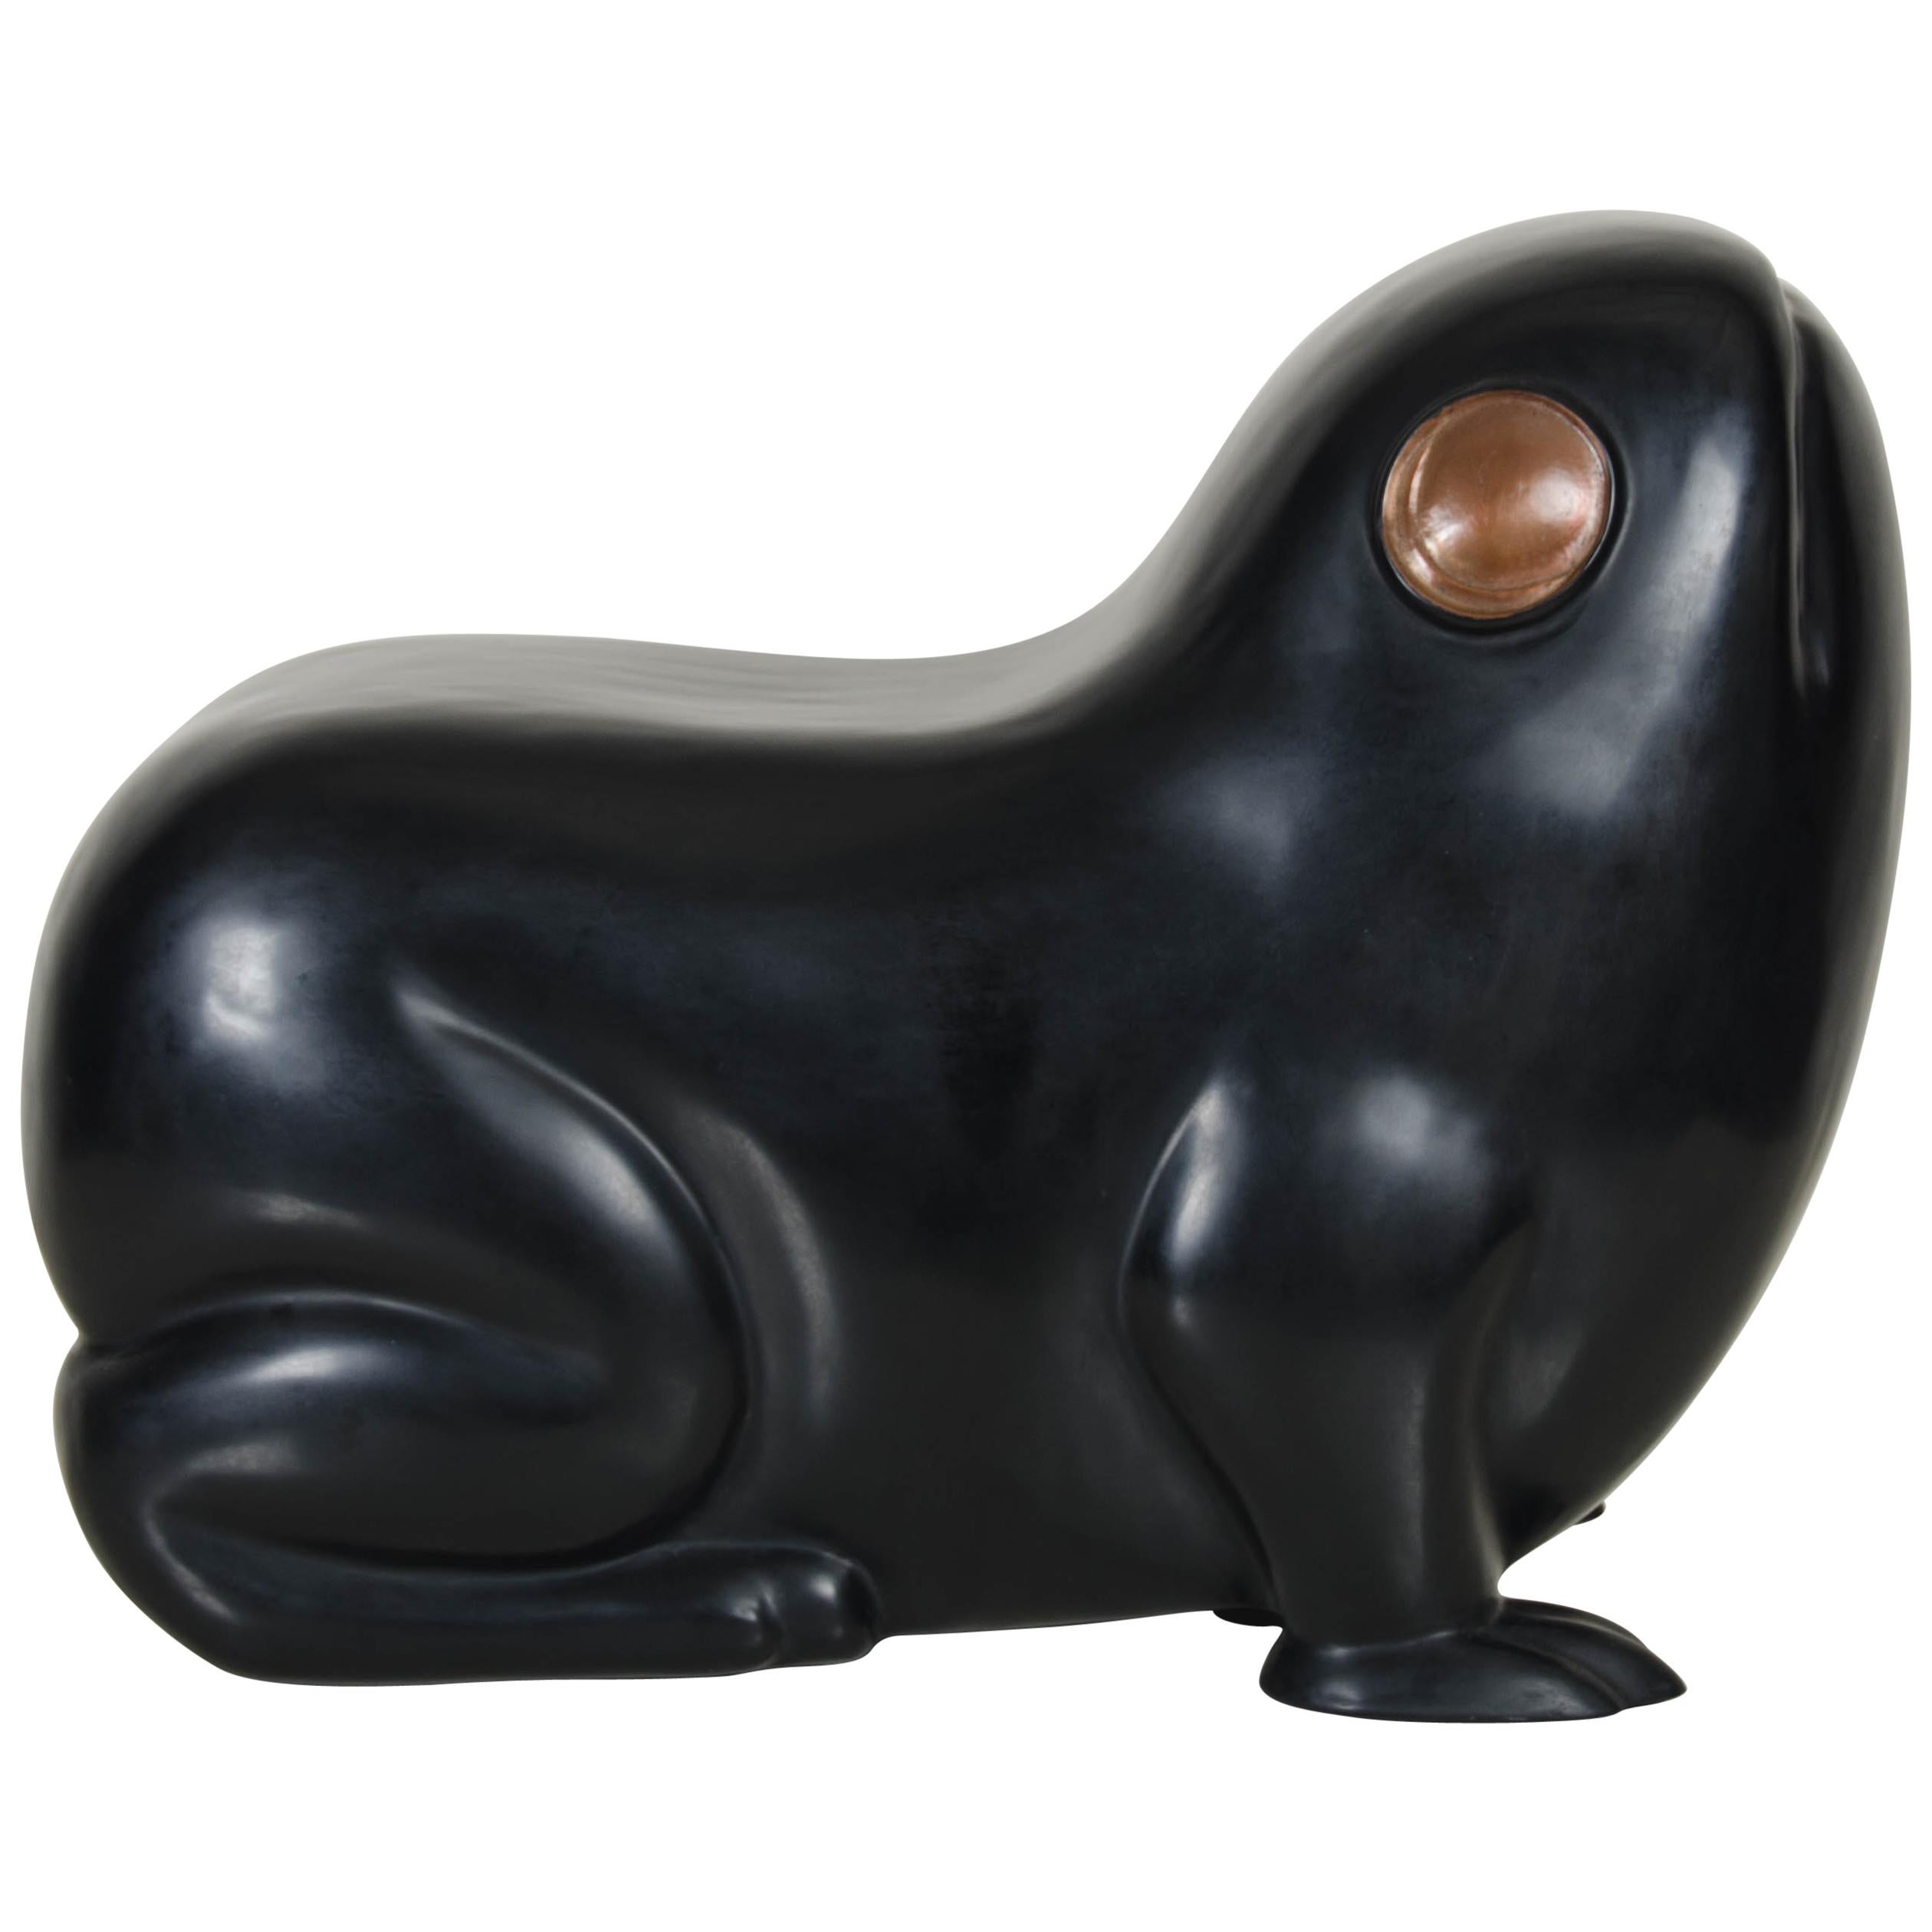 Frog Seat, Black Lacquer by Robert Kuo, Hand Repousse, Limited Edition